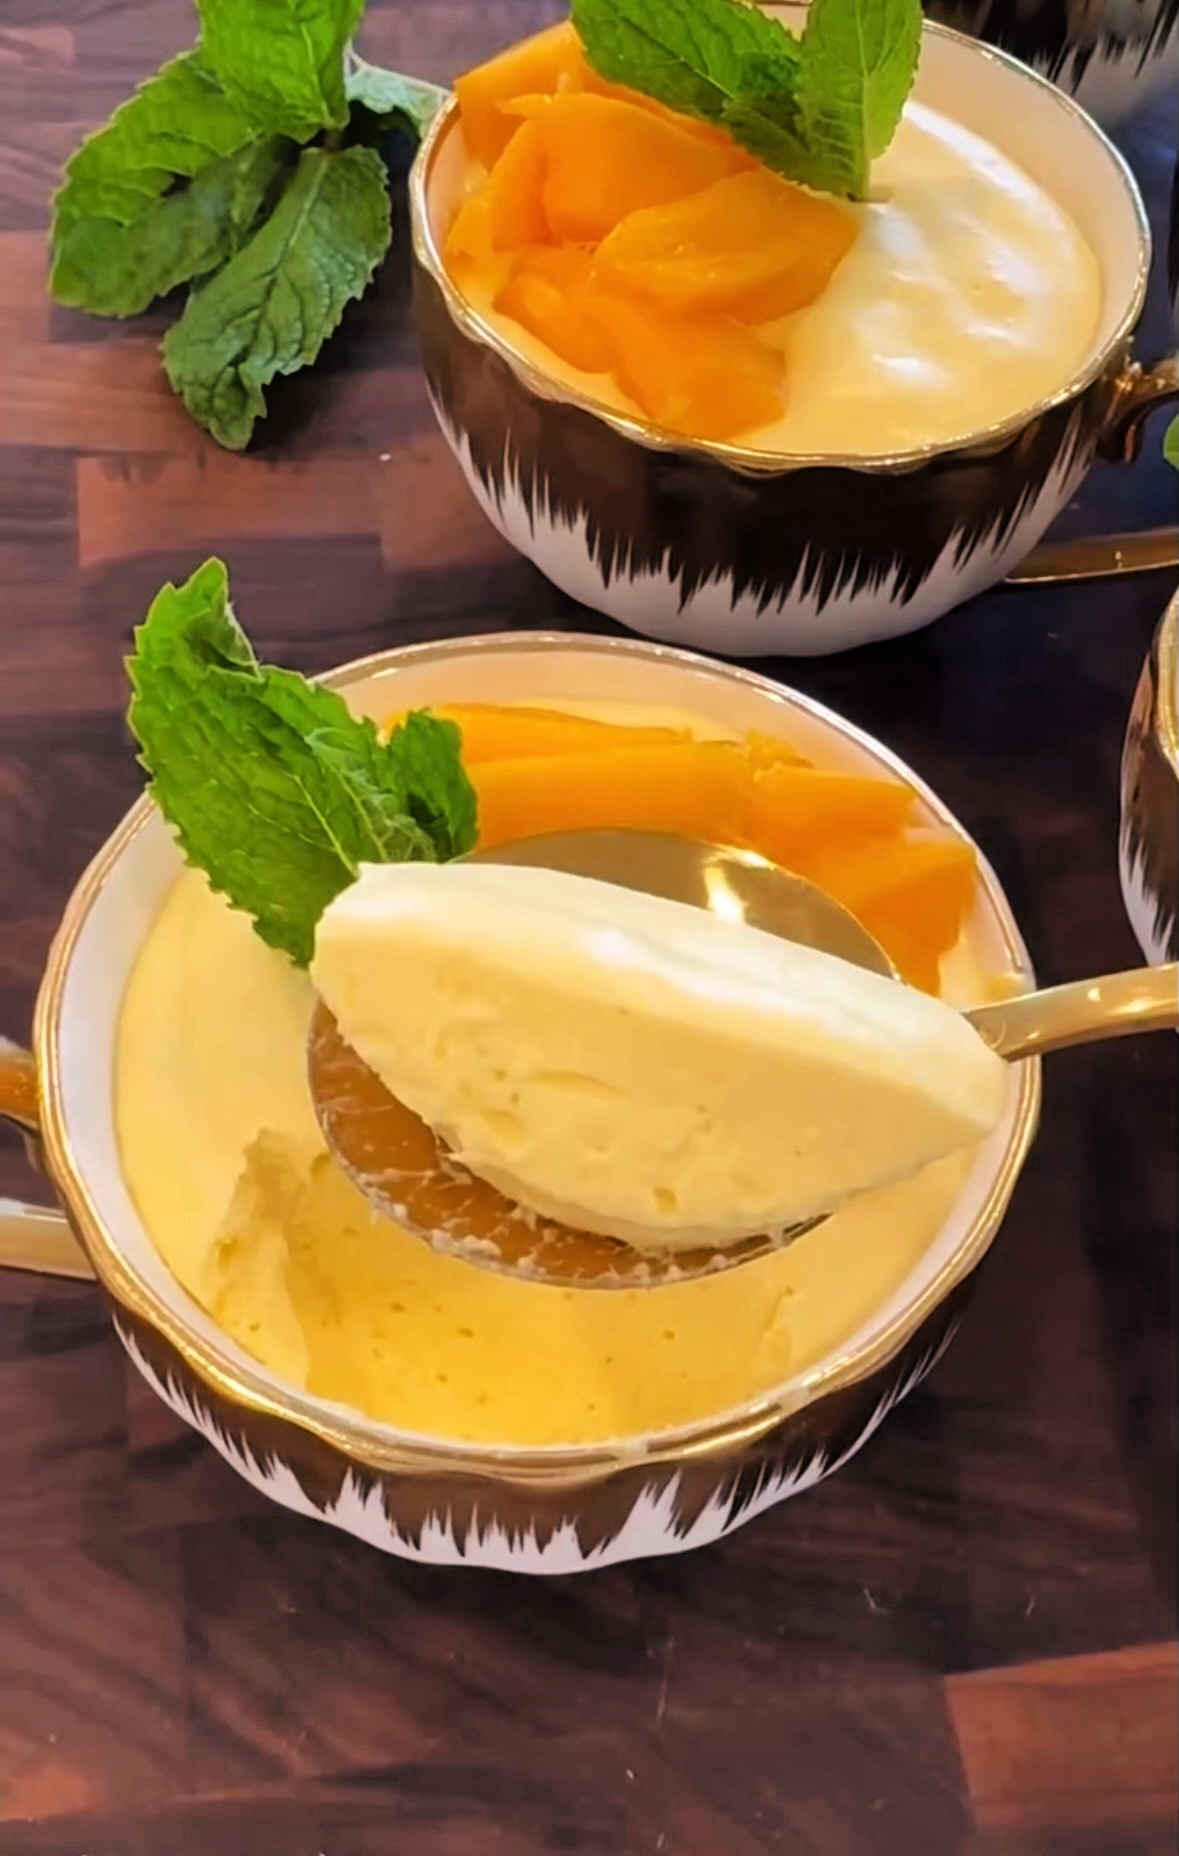 Mango mousse being scooped out with a golden colored spoon